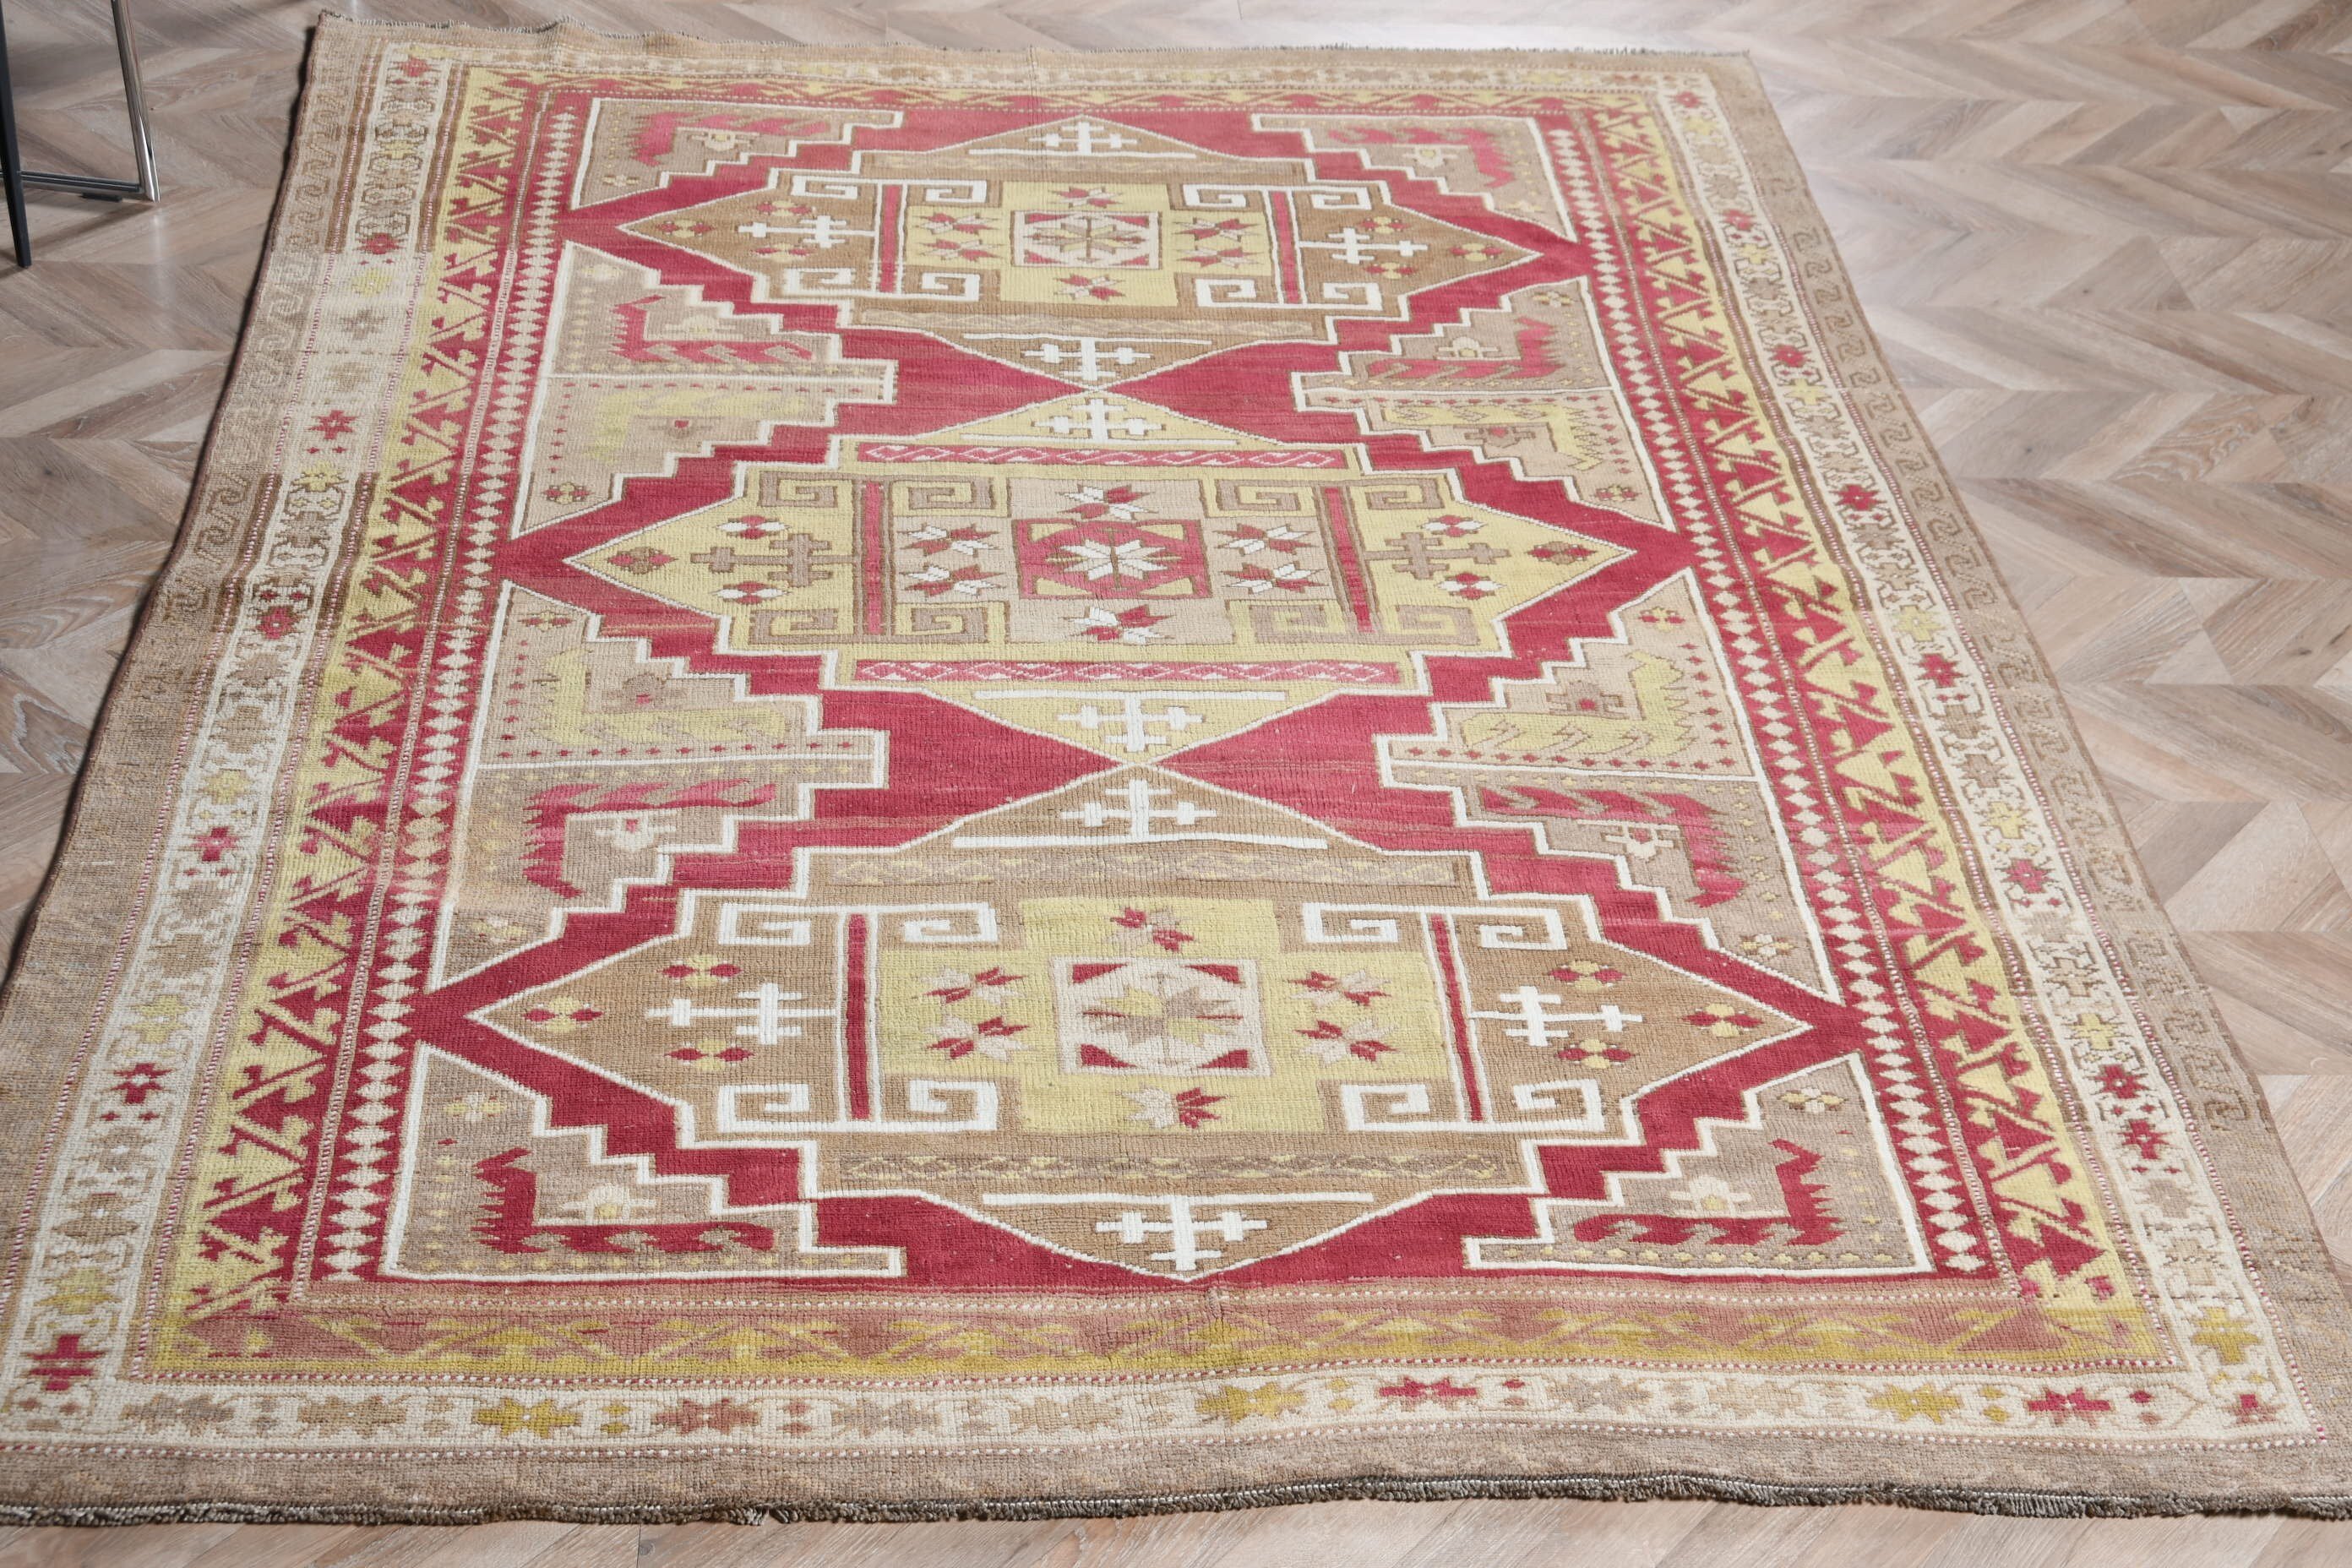 Muted Rug, Bedroom Rugs, 5.7x8 ft Large Rugs, Salon Rugs, Vintage Rugs, Red Oushak Rugs, Turkish Rugs, Rugs for Dining Room